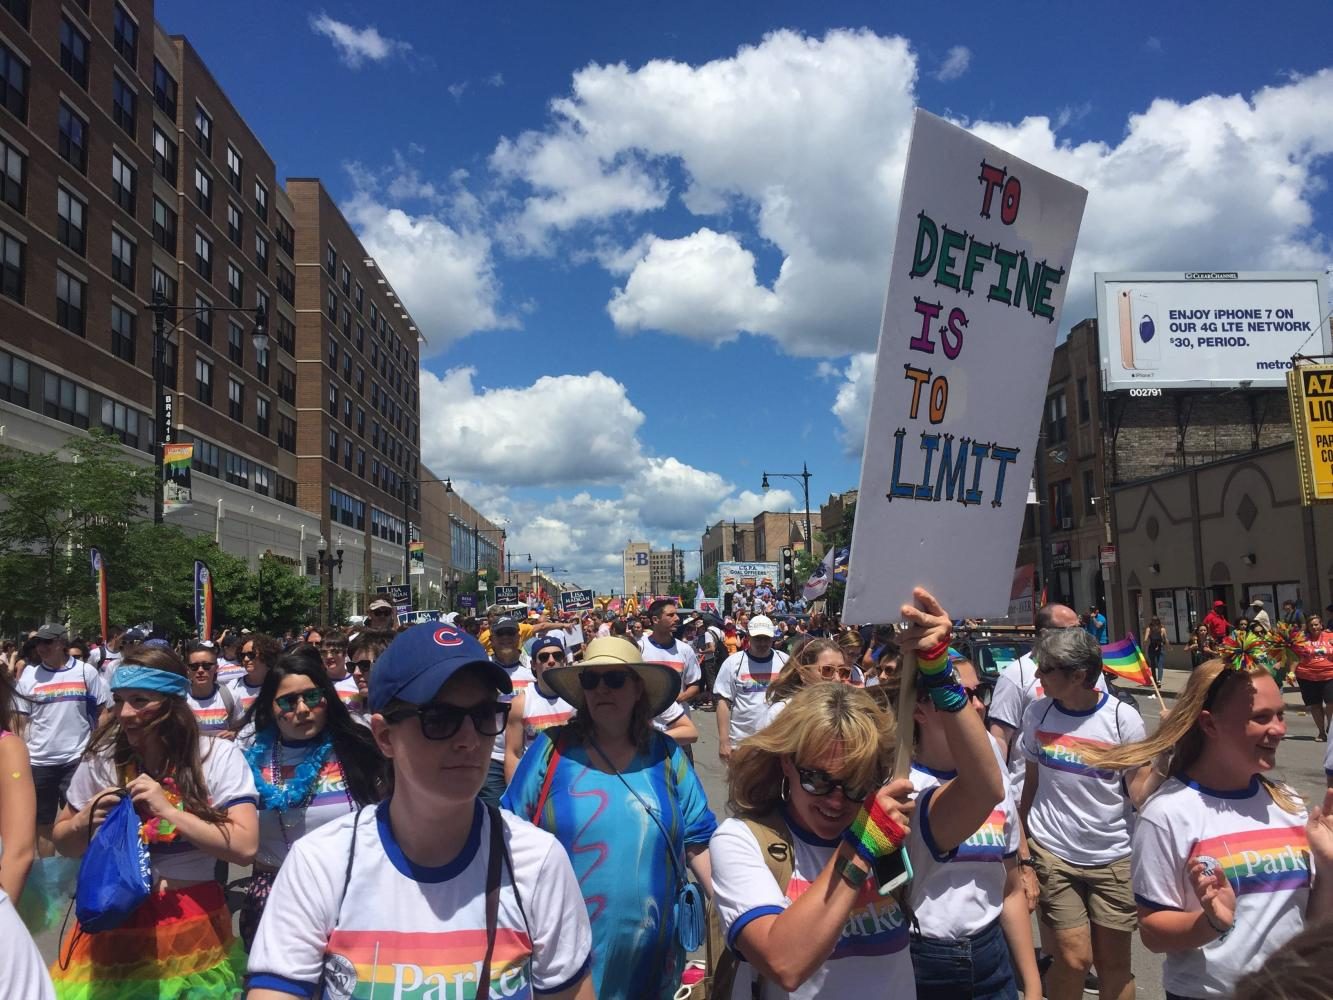 Sophomores+Senna+Gardener+and+Abri+Berg%2C+fourth+grade+teacher+Miriam+Pickus%2C+upper+school+math+teacher+Chris+Riff%2C+and+other+members+of+the+Parker+community+march+in+the+Chicago+Pride+Parade.